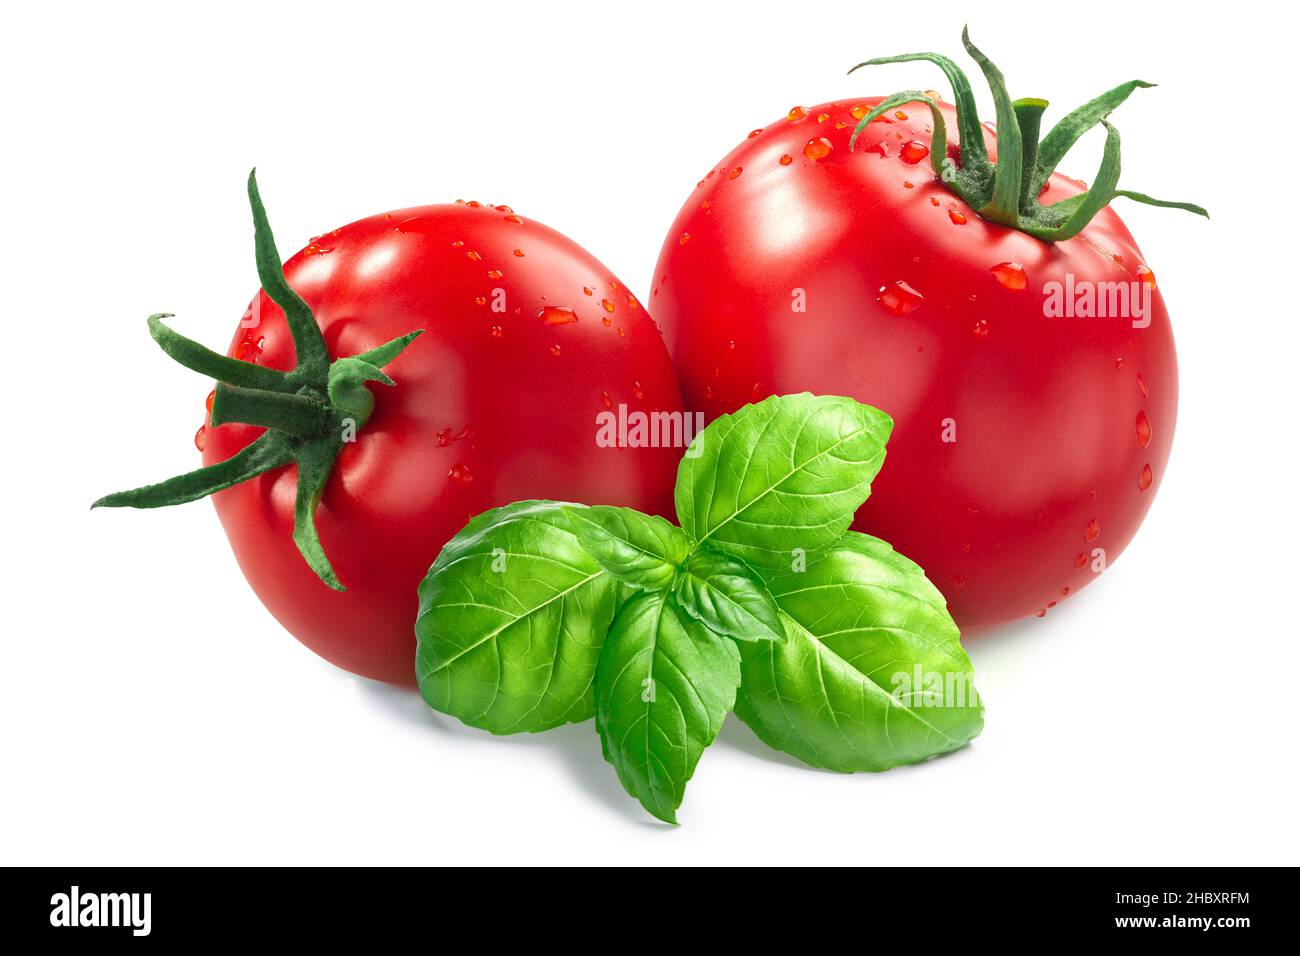 Fresh Tomatoes with basil leaves isolated Stock Photo